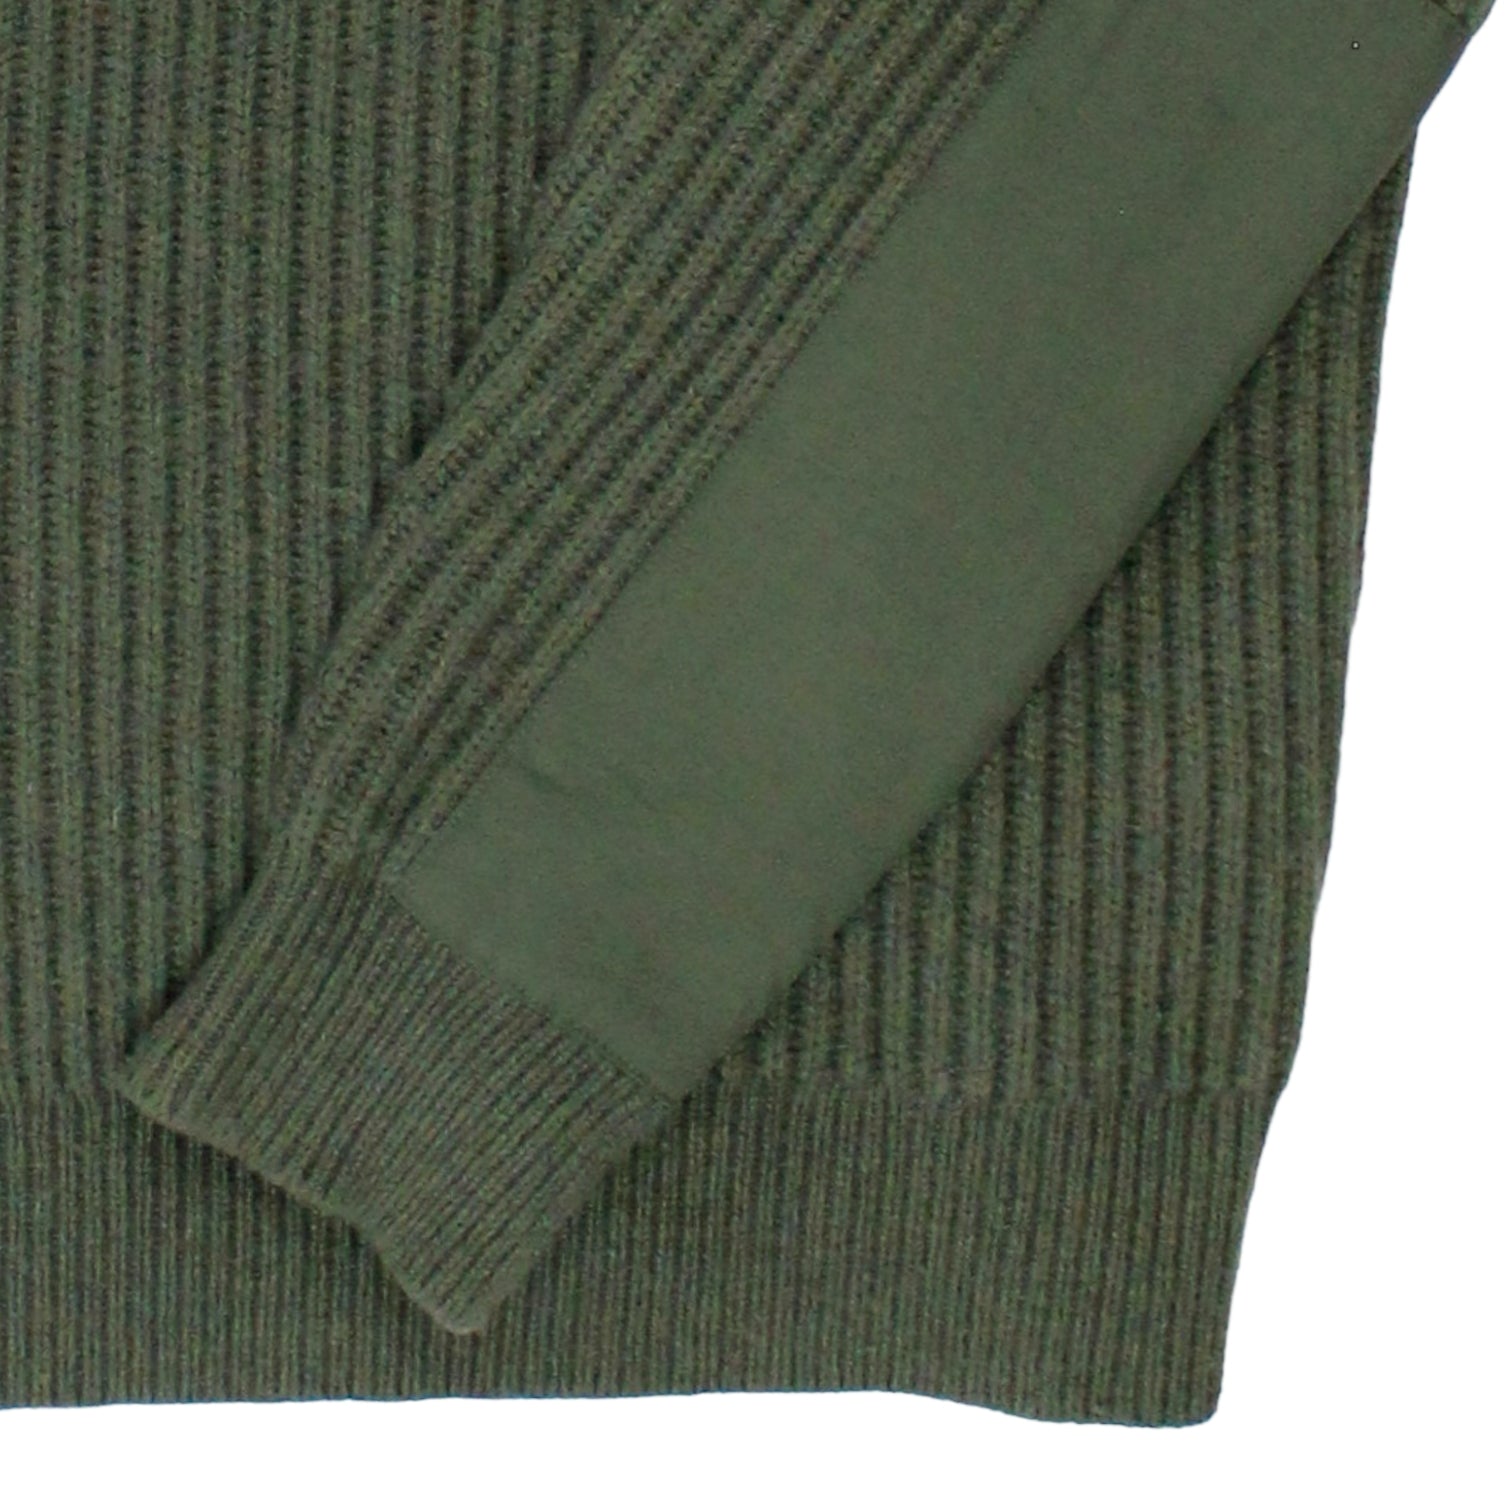 Calvin Klein Jeans Green Heavy Ribbed Jumper